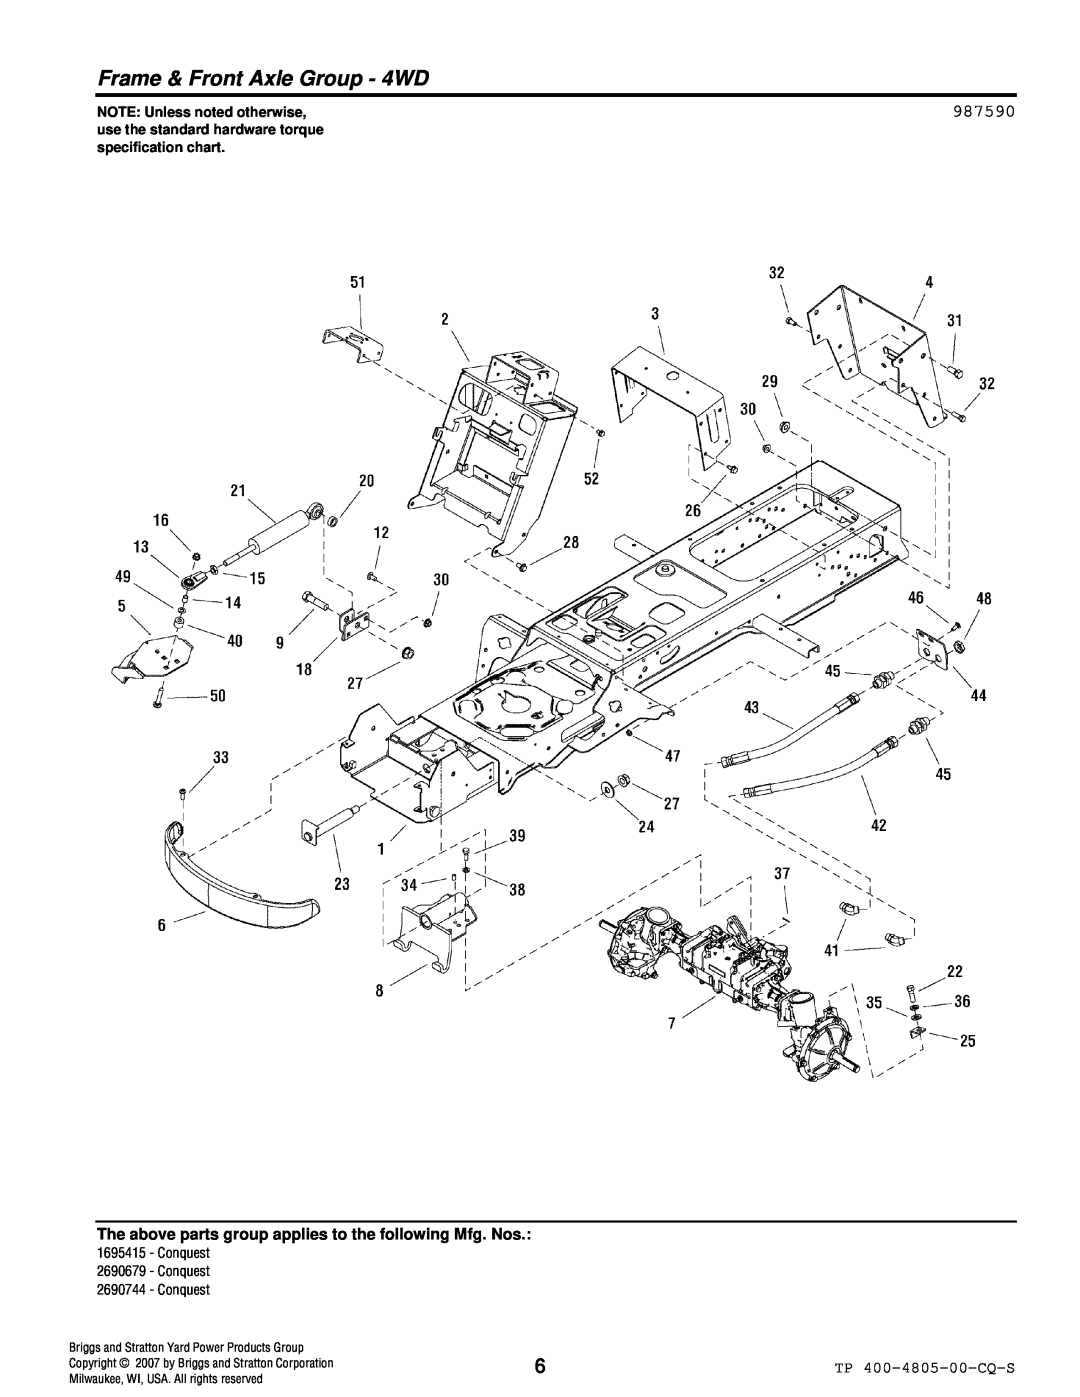 Simplicity 4WD Series manual Frame & Front Axle Group - 4WD, 987590, NOTE: Unless noted otherwise 